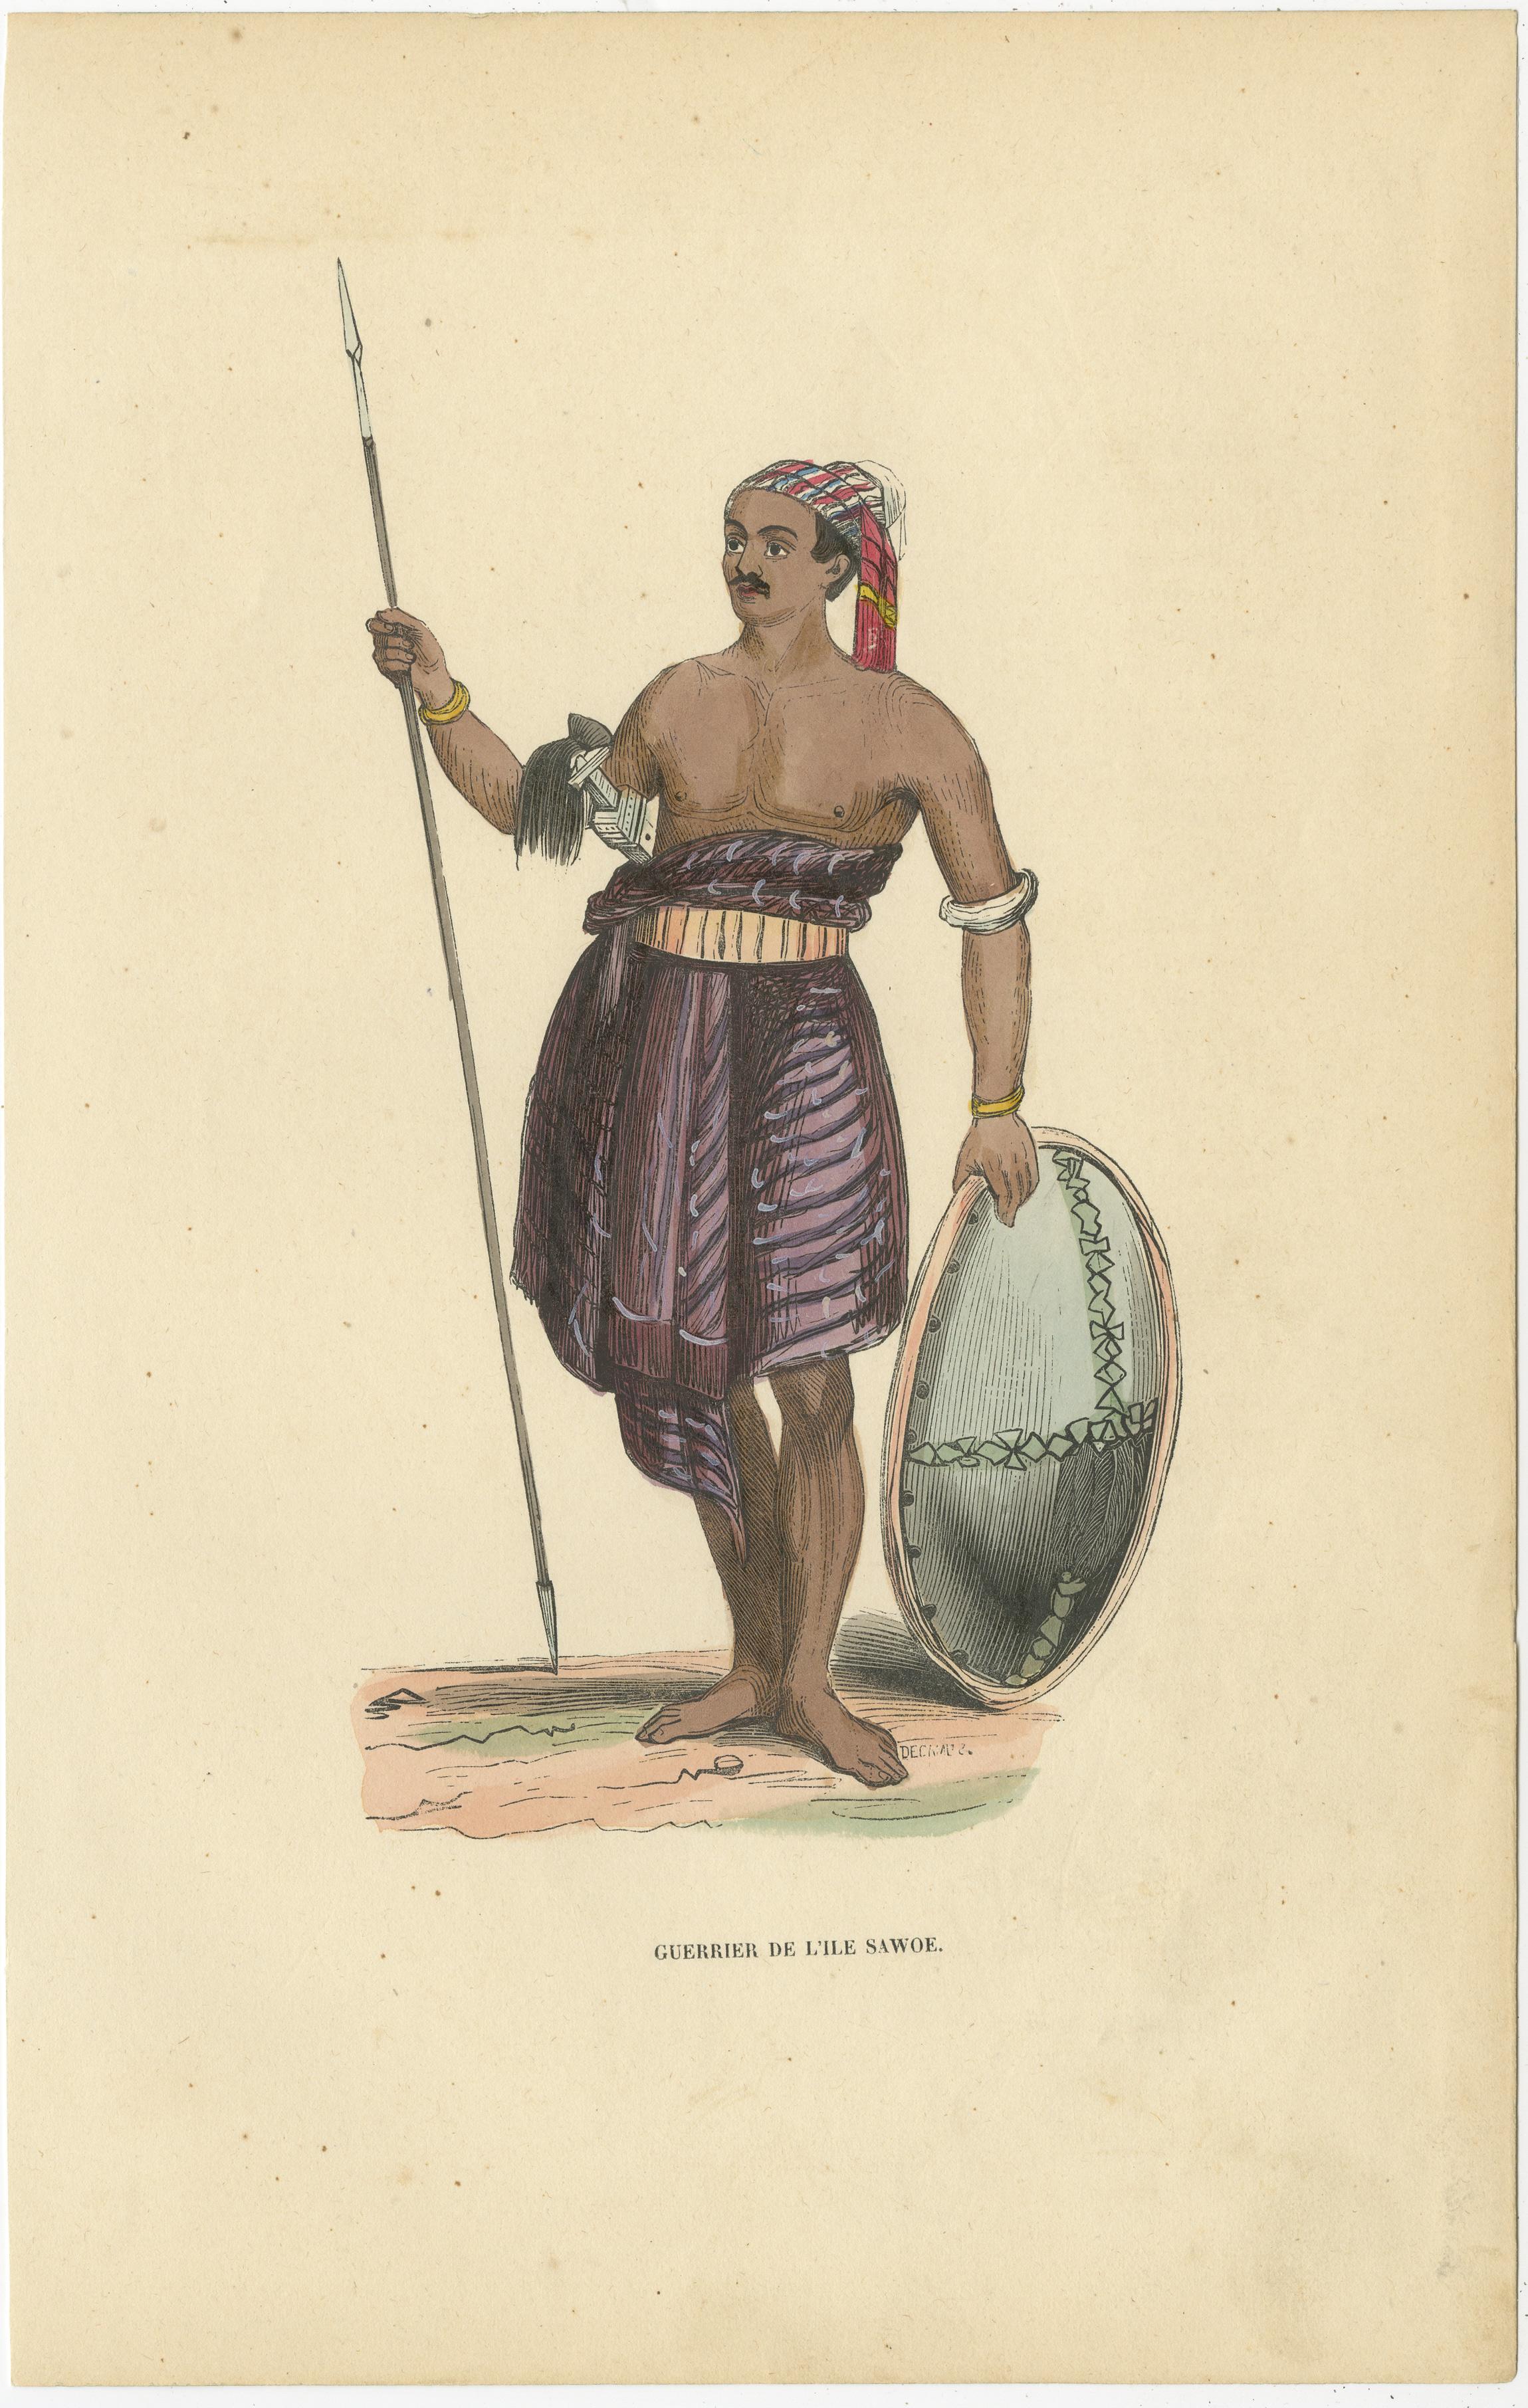 Antique print titled 'Guerrier de l’Ile Sawoe'. Hand colored woodcut of a warrior of Sawu island, East Nusa Tenggara, Indonesia. He wears a batik headcloth, ikat sarong (skirt), belt with kris, bracelets, and carries a lance and shield.

This